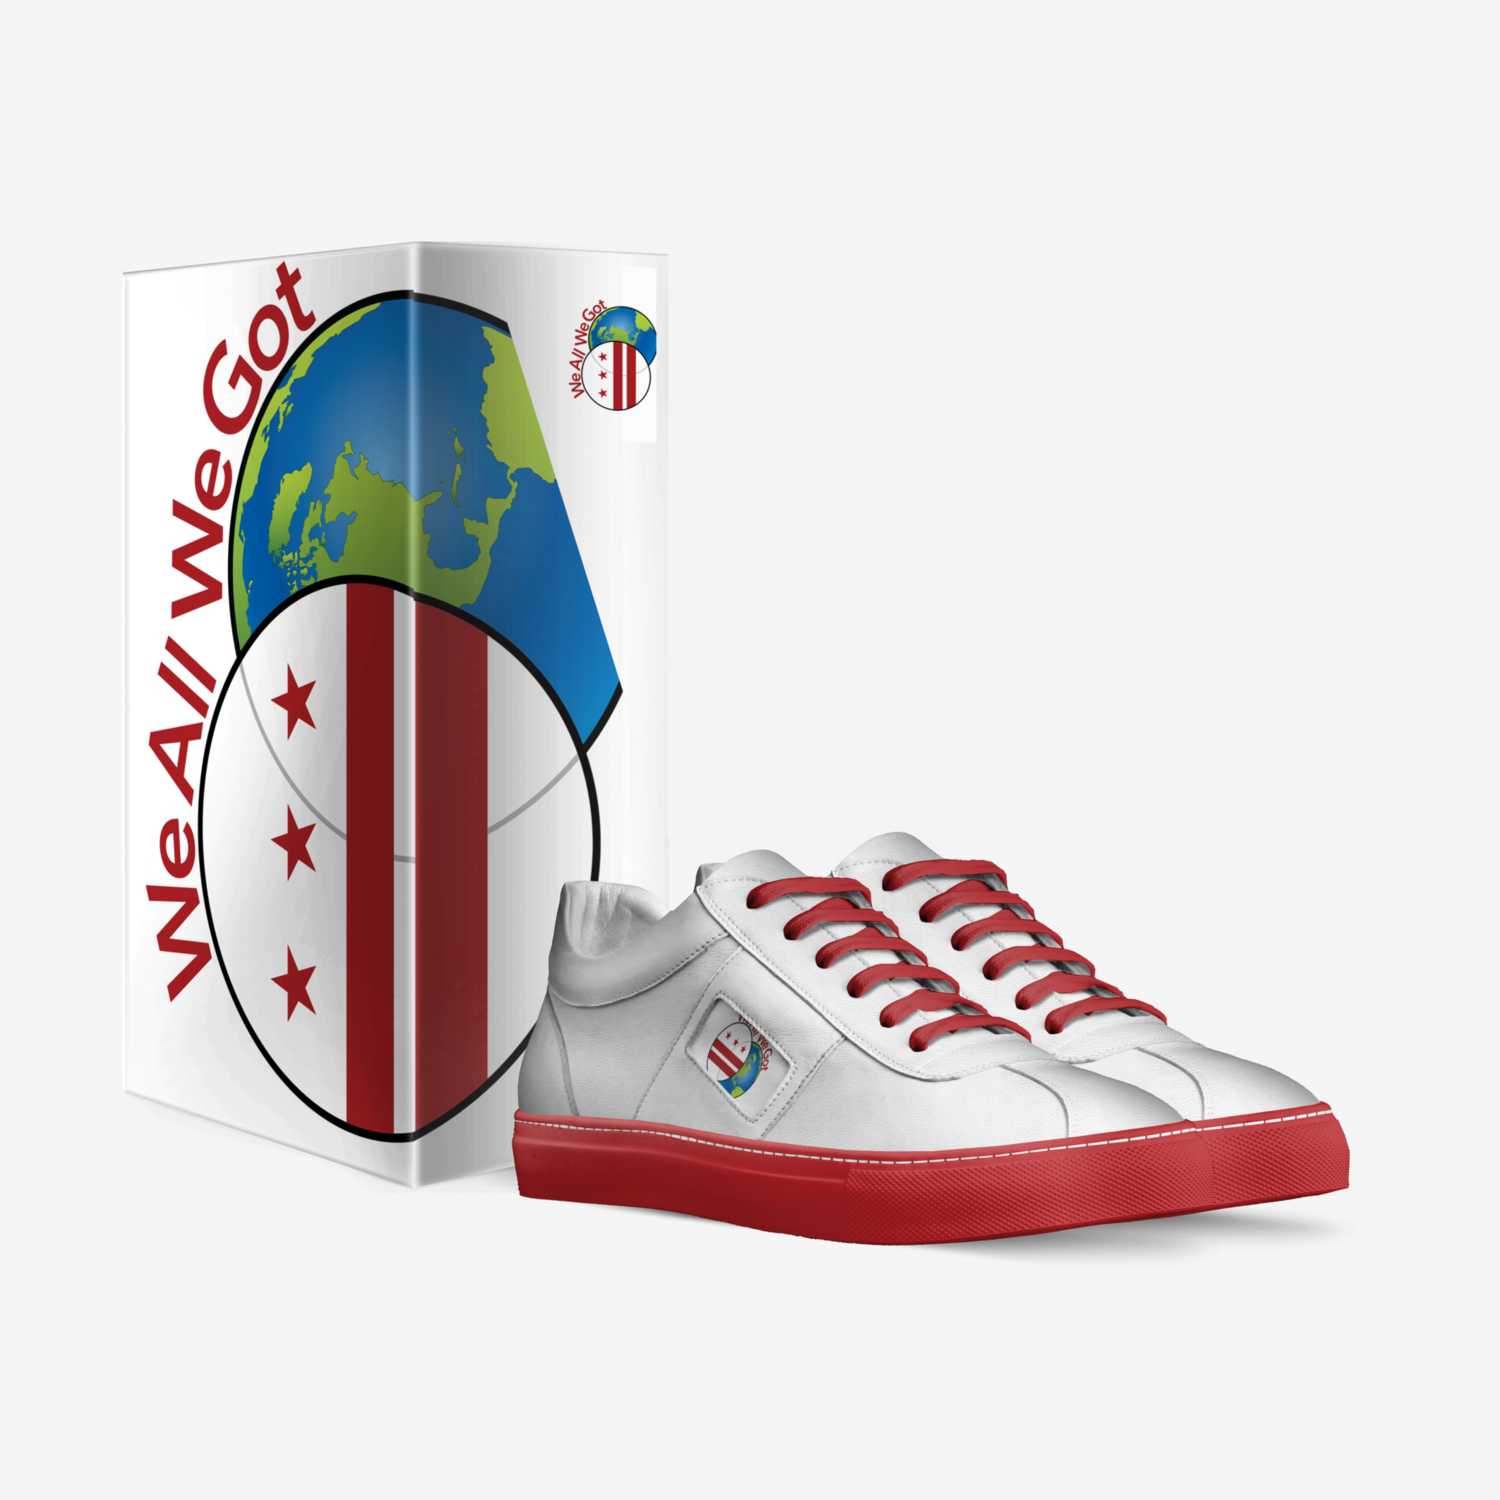 WeAllWeGot LT2 custom made in Italy shoes by We All We Got Attire | Box view